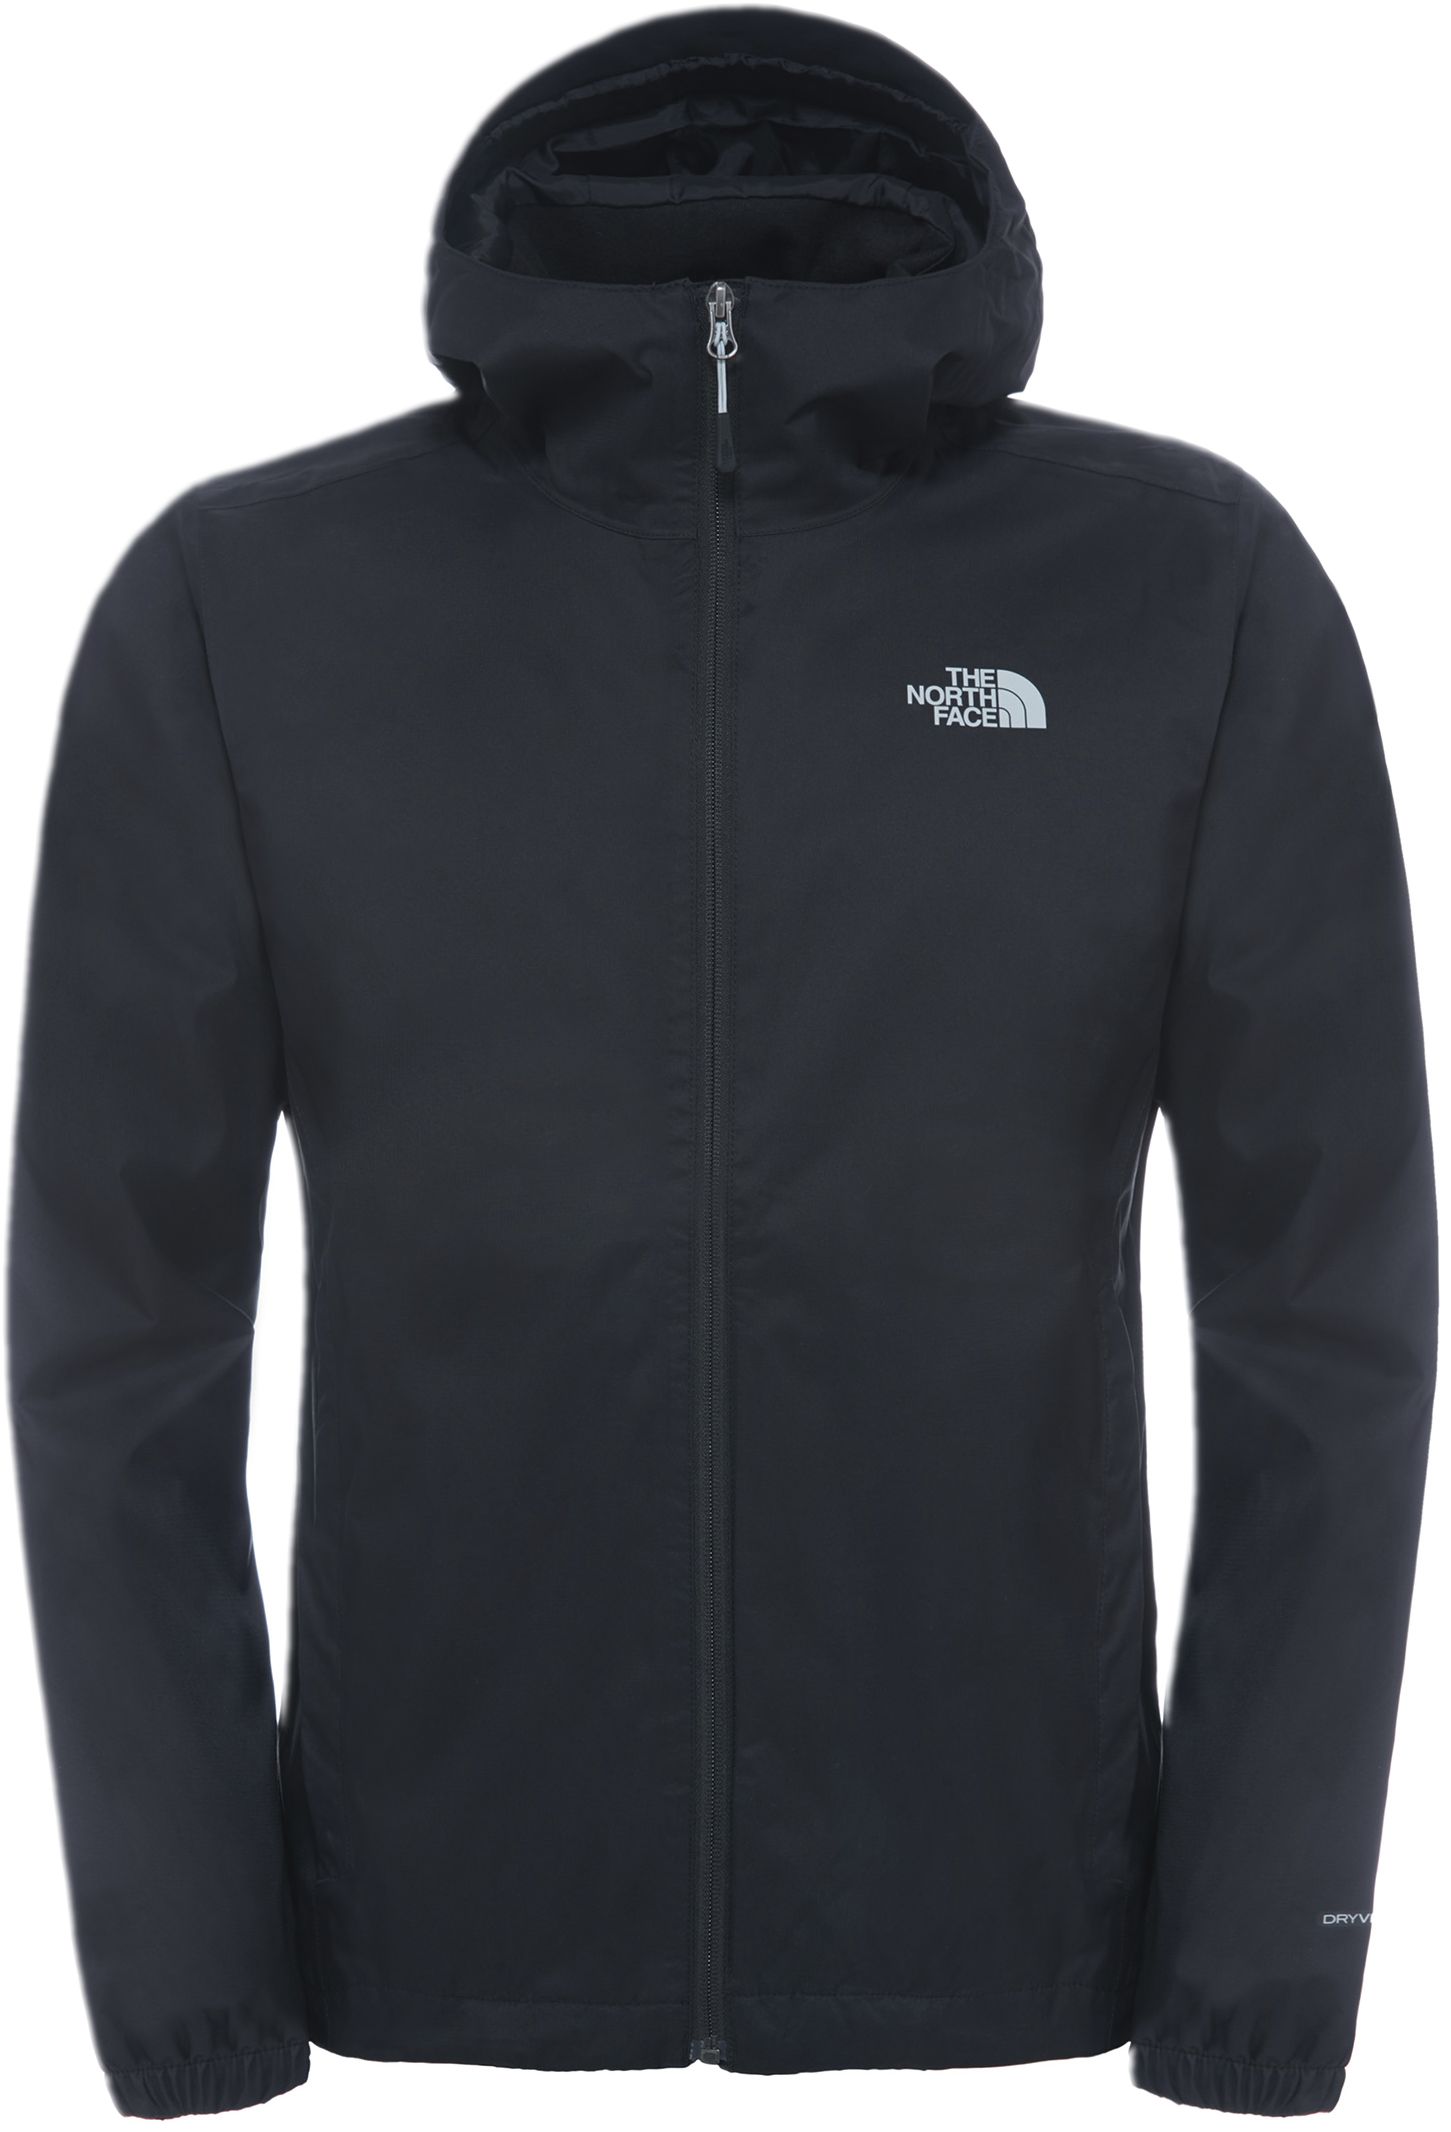 THE NORTH FACE, M QUEST JKT